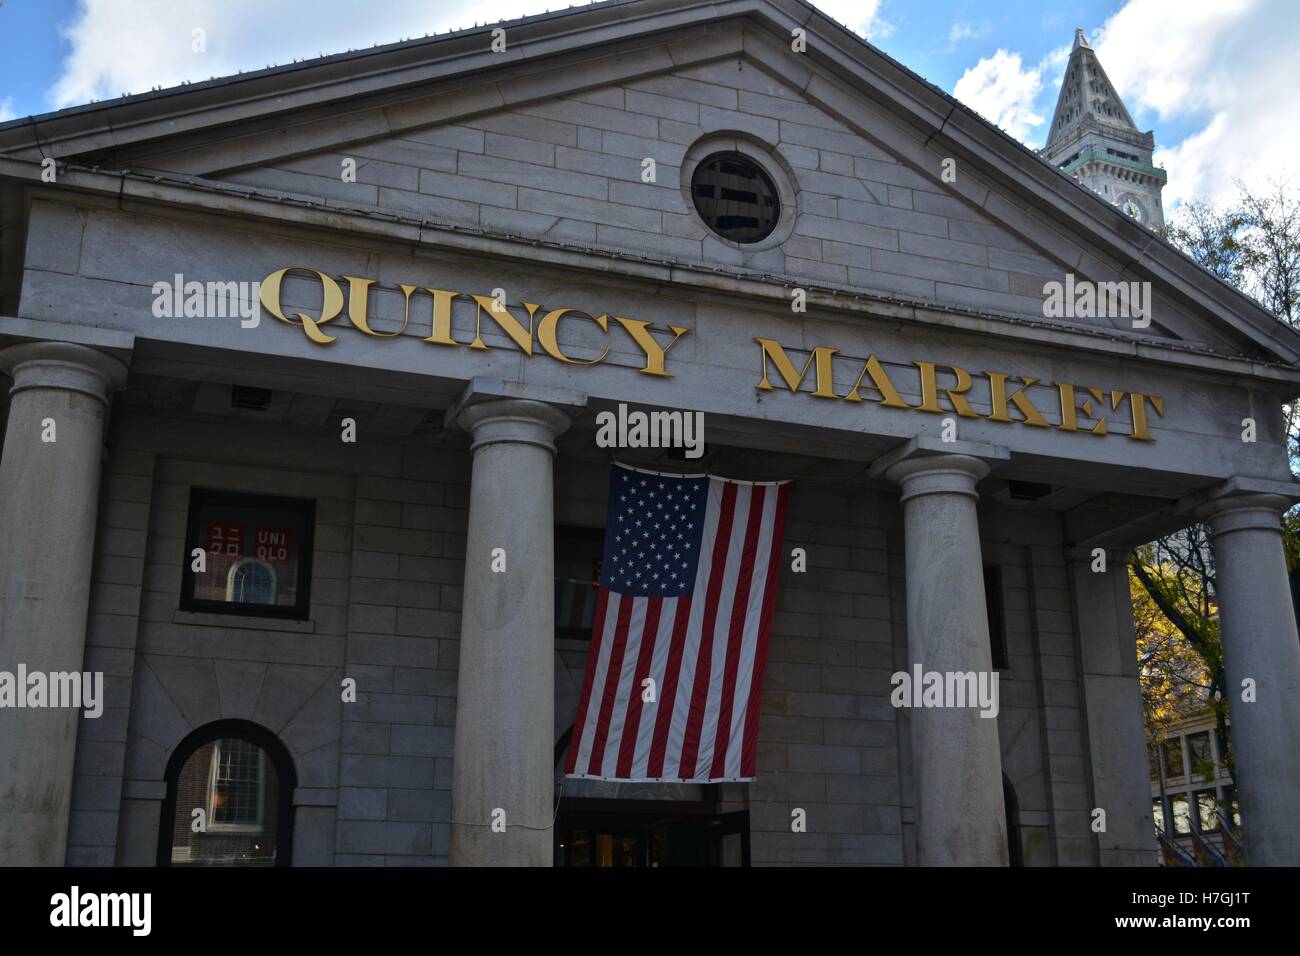 Quincy Market in Downtown Boston along the iconic Freedom Trail. Stock Photo